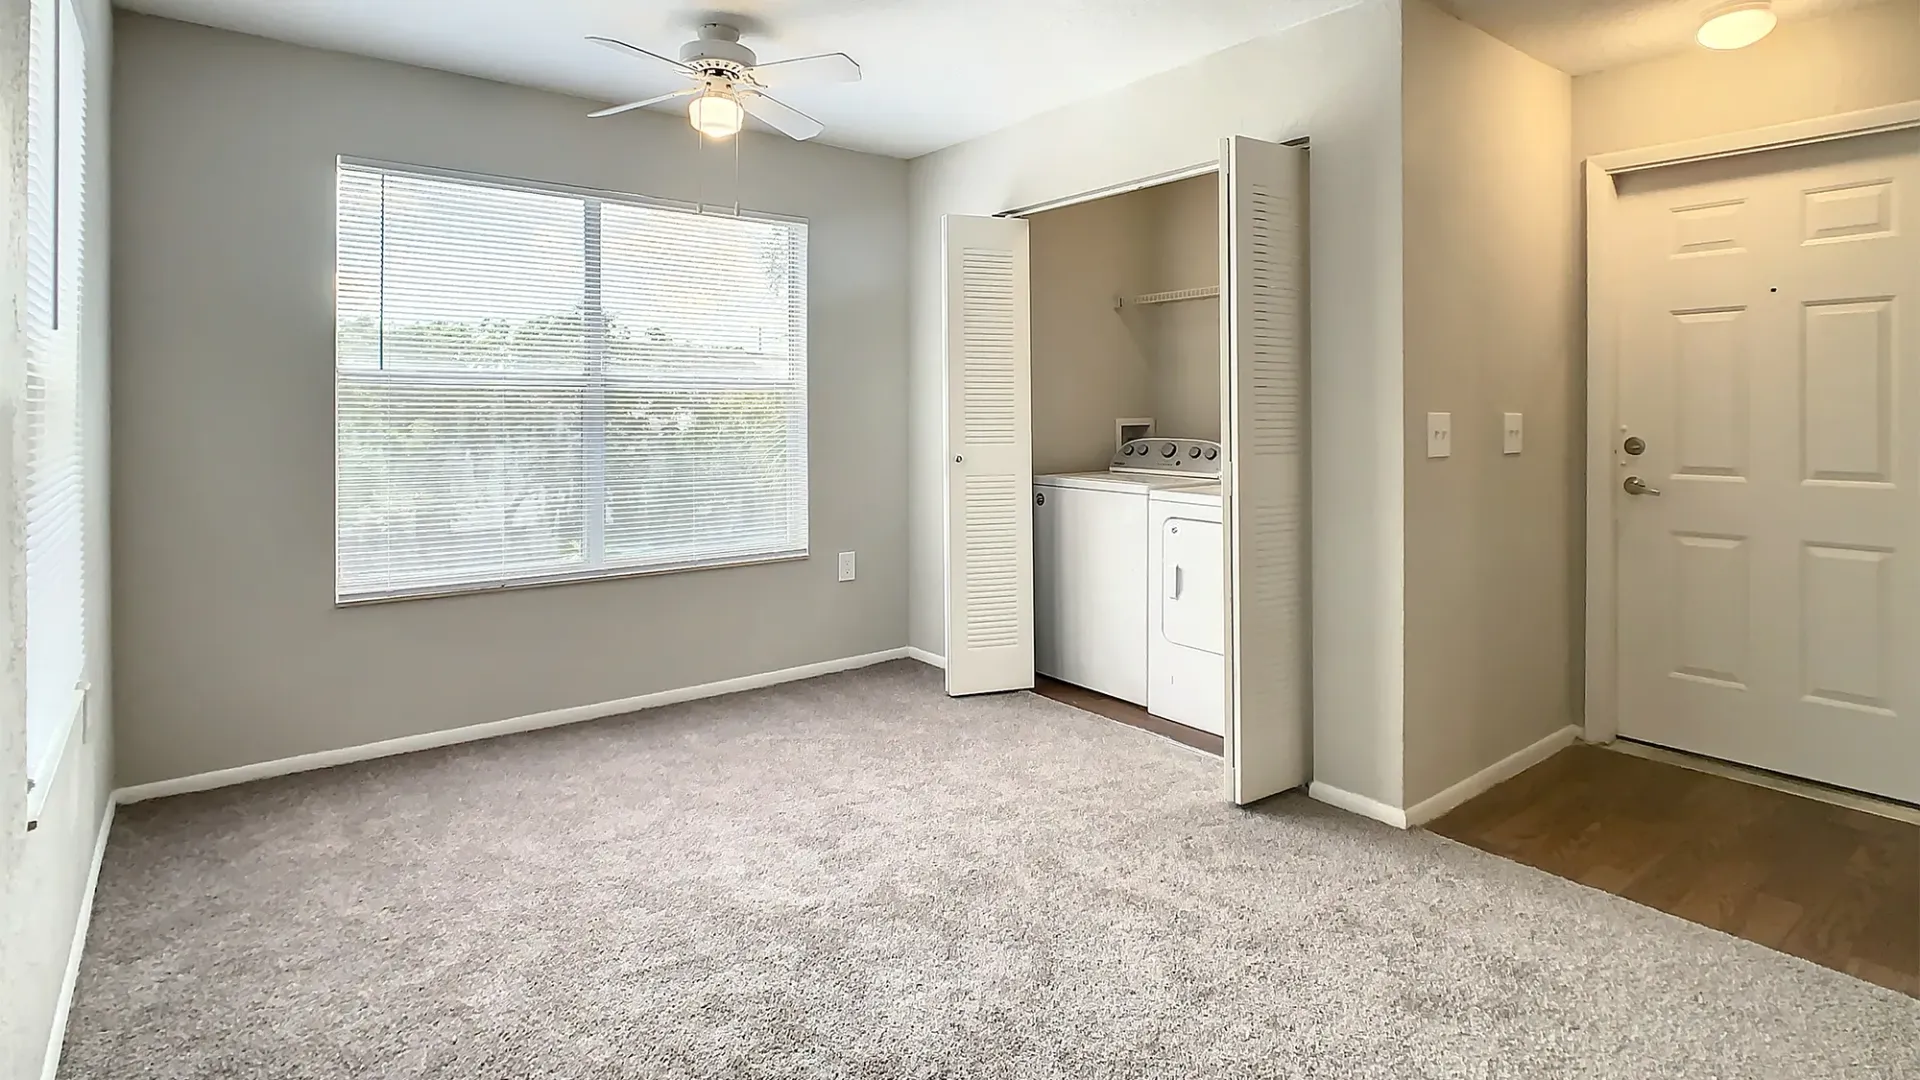 A dining space off the living room, featuring a closet with full size washer and dryer within